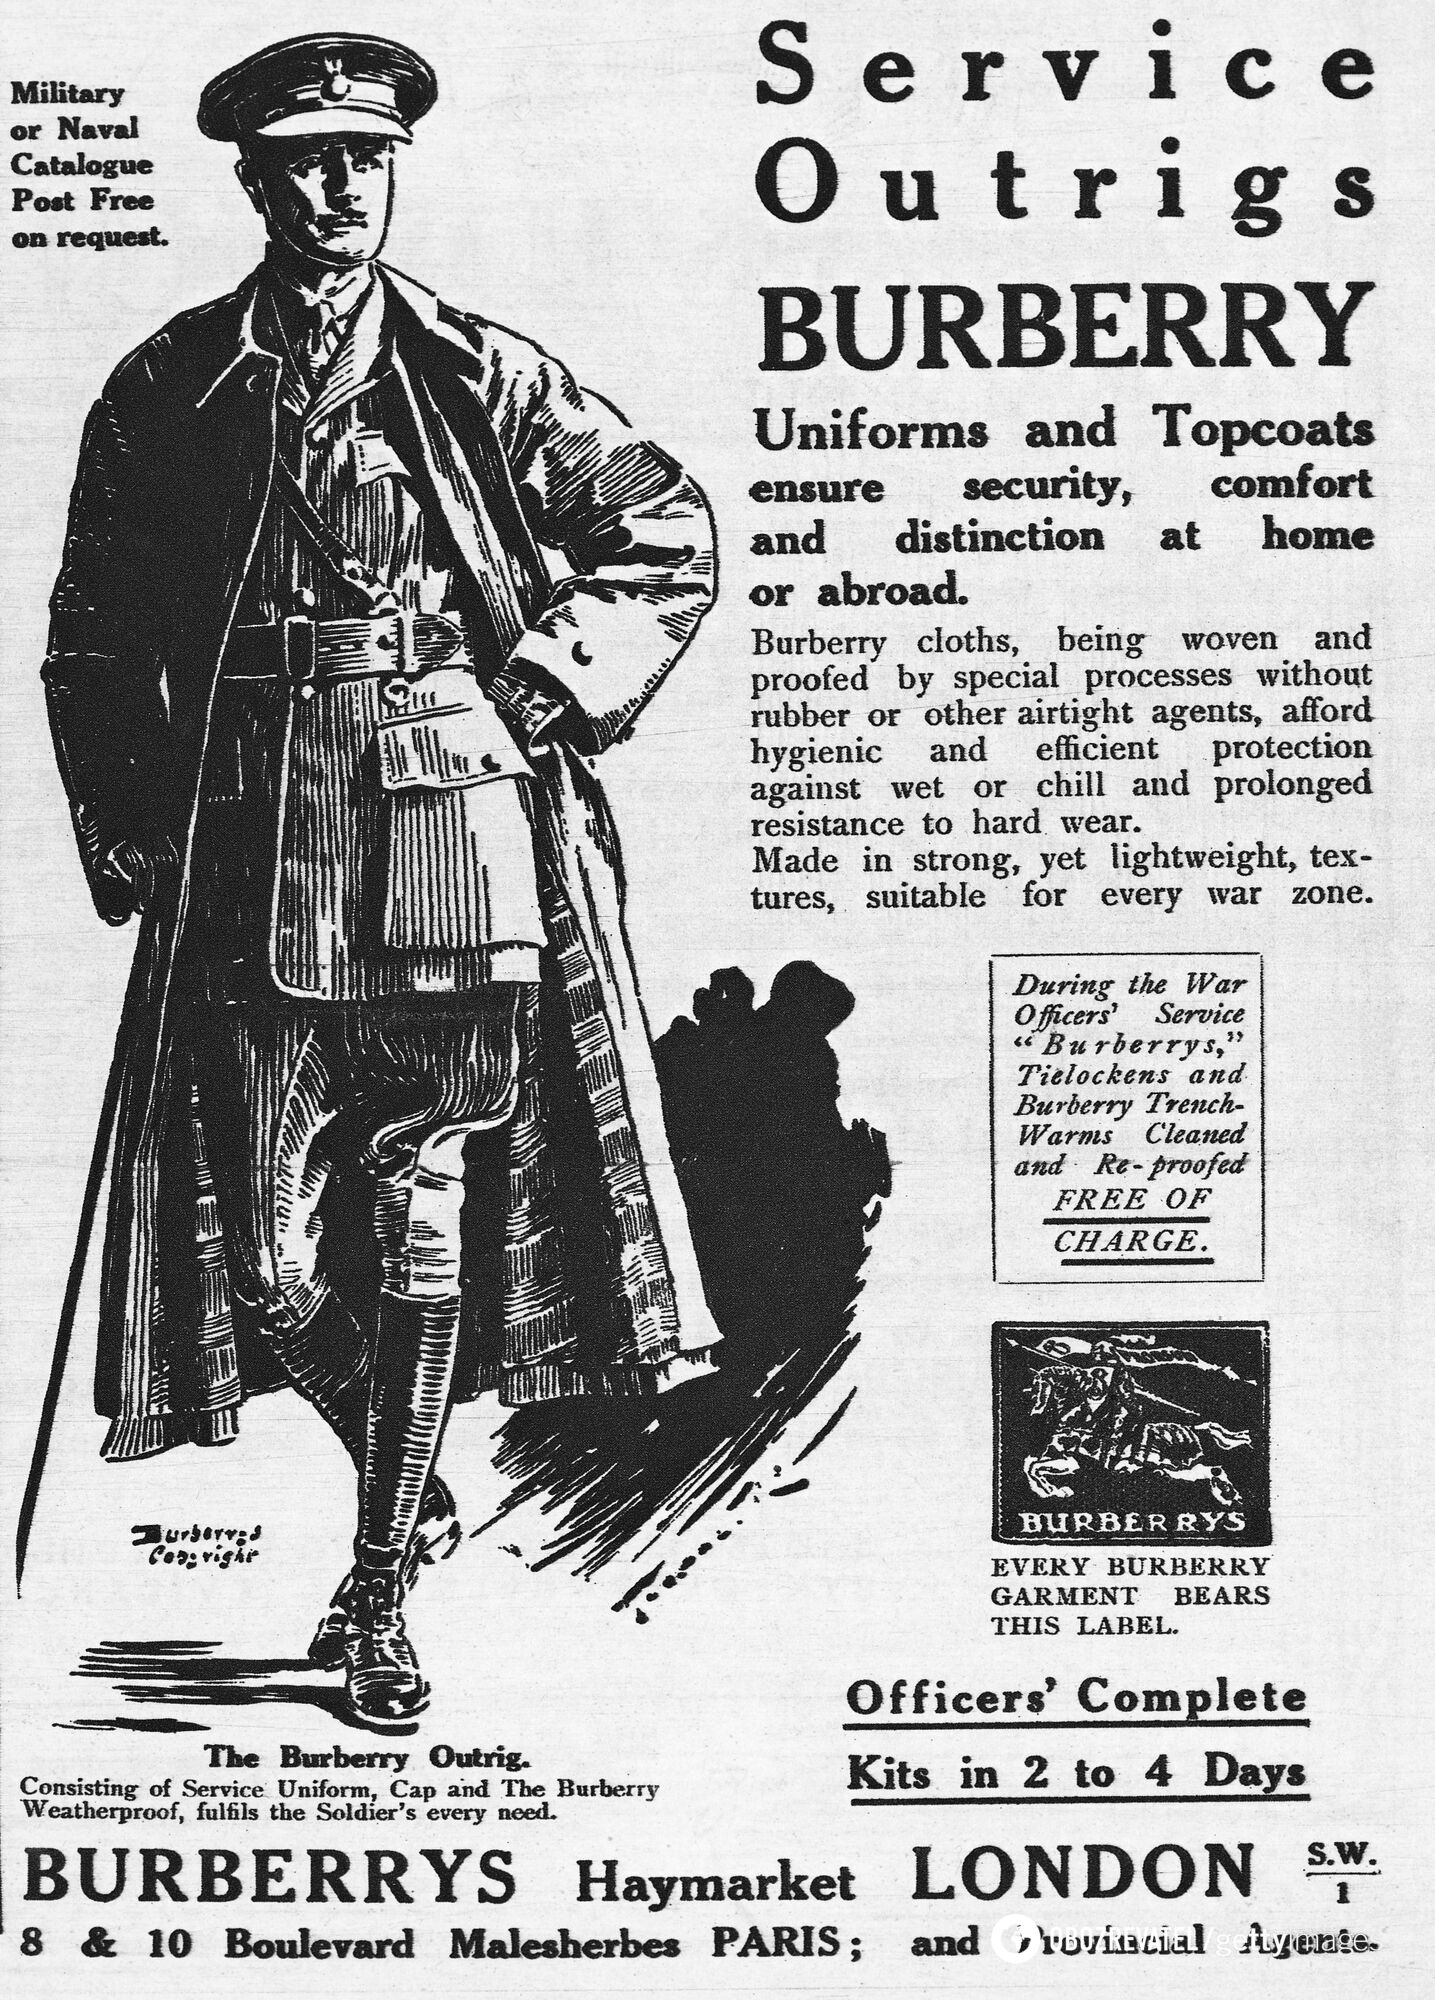 Thomas Berberry invented a functional raincoat for soldiers